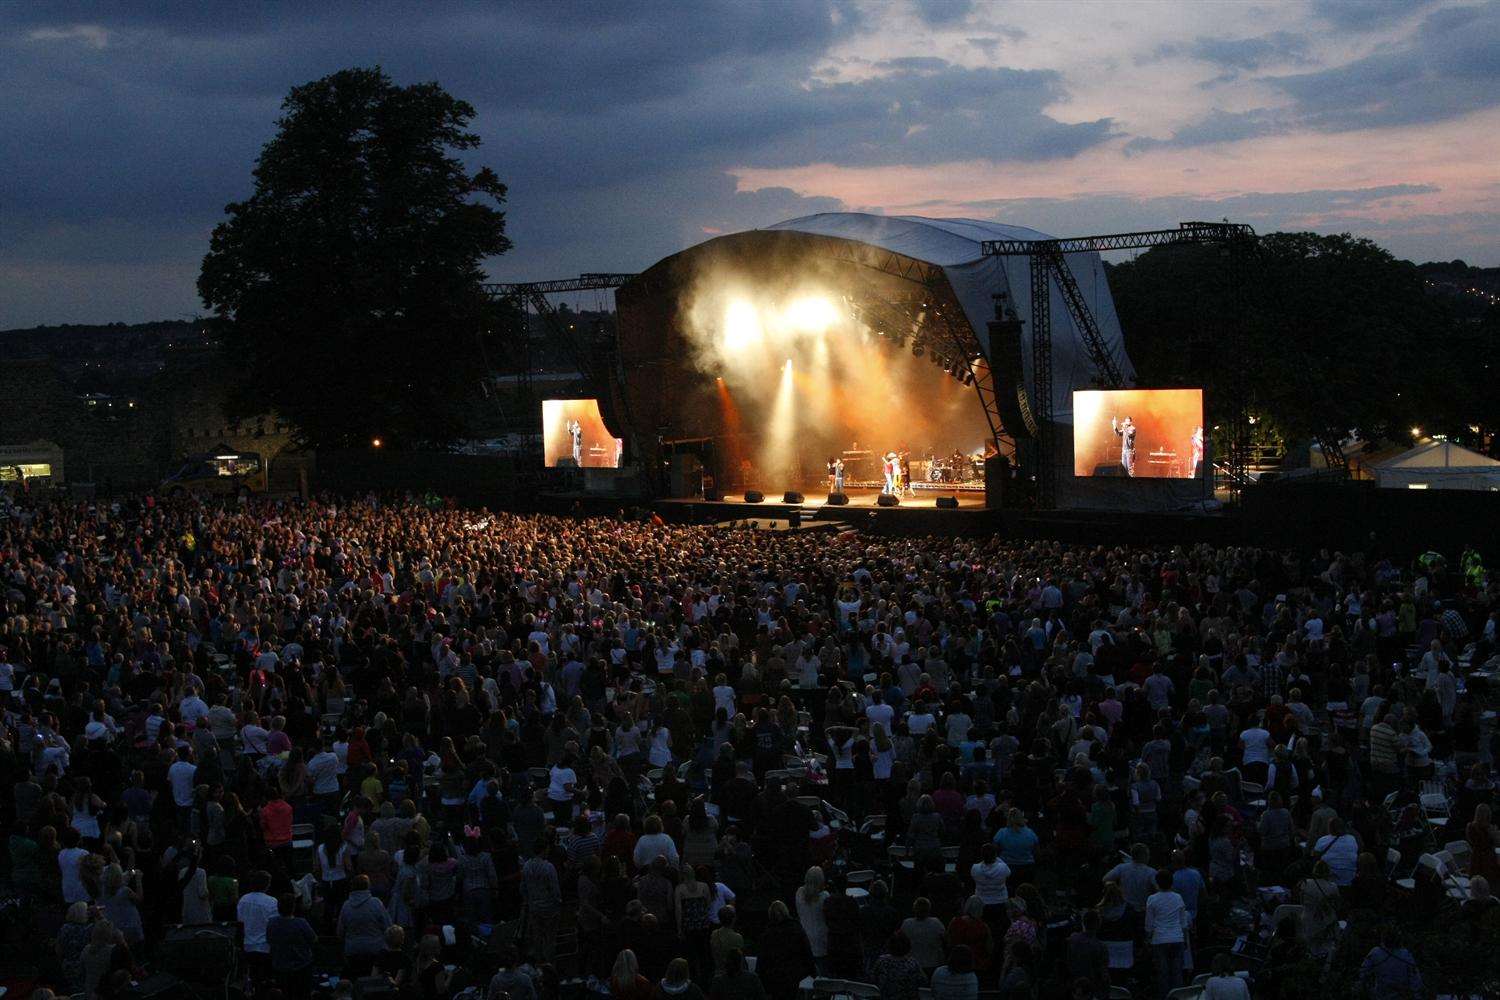 The Castle Concerts at Rochester Castle will run until Saturday, July 19